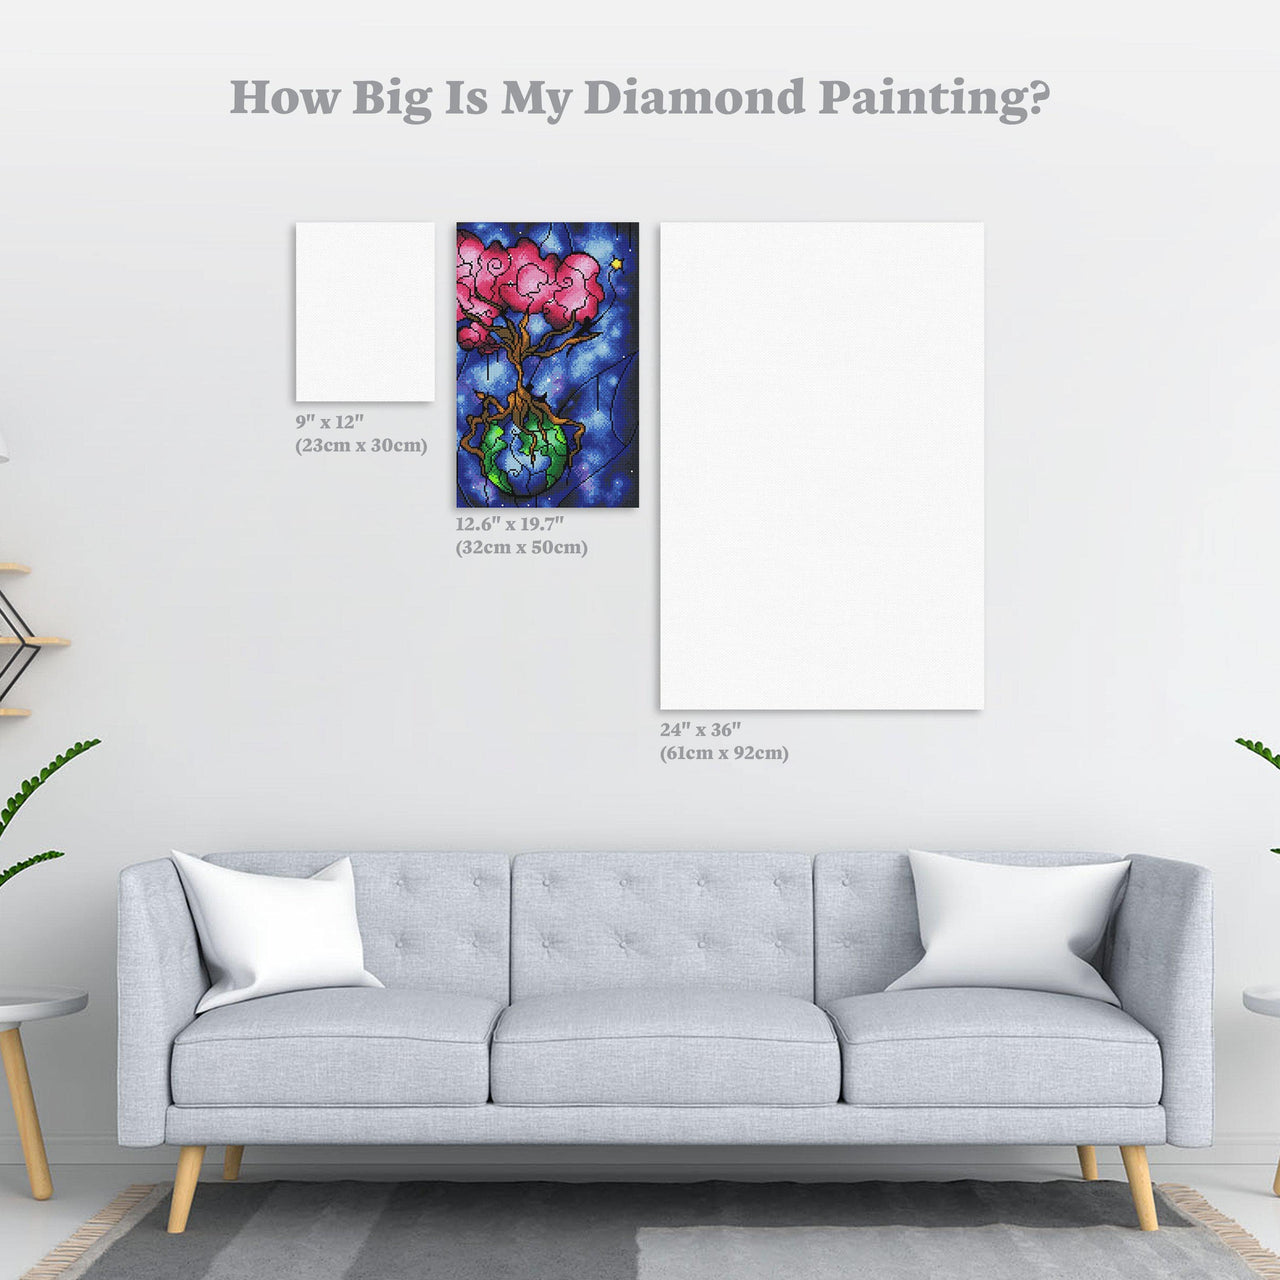 Diamond Painting Always Us 12.6" x 19.7" (32cm x 50cm) / Round With 32 Colors including 2 ABs / 19548